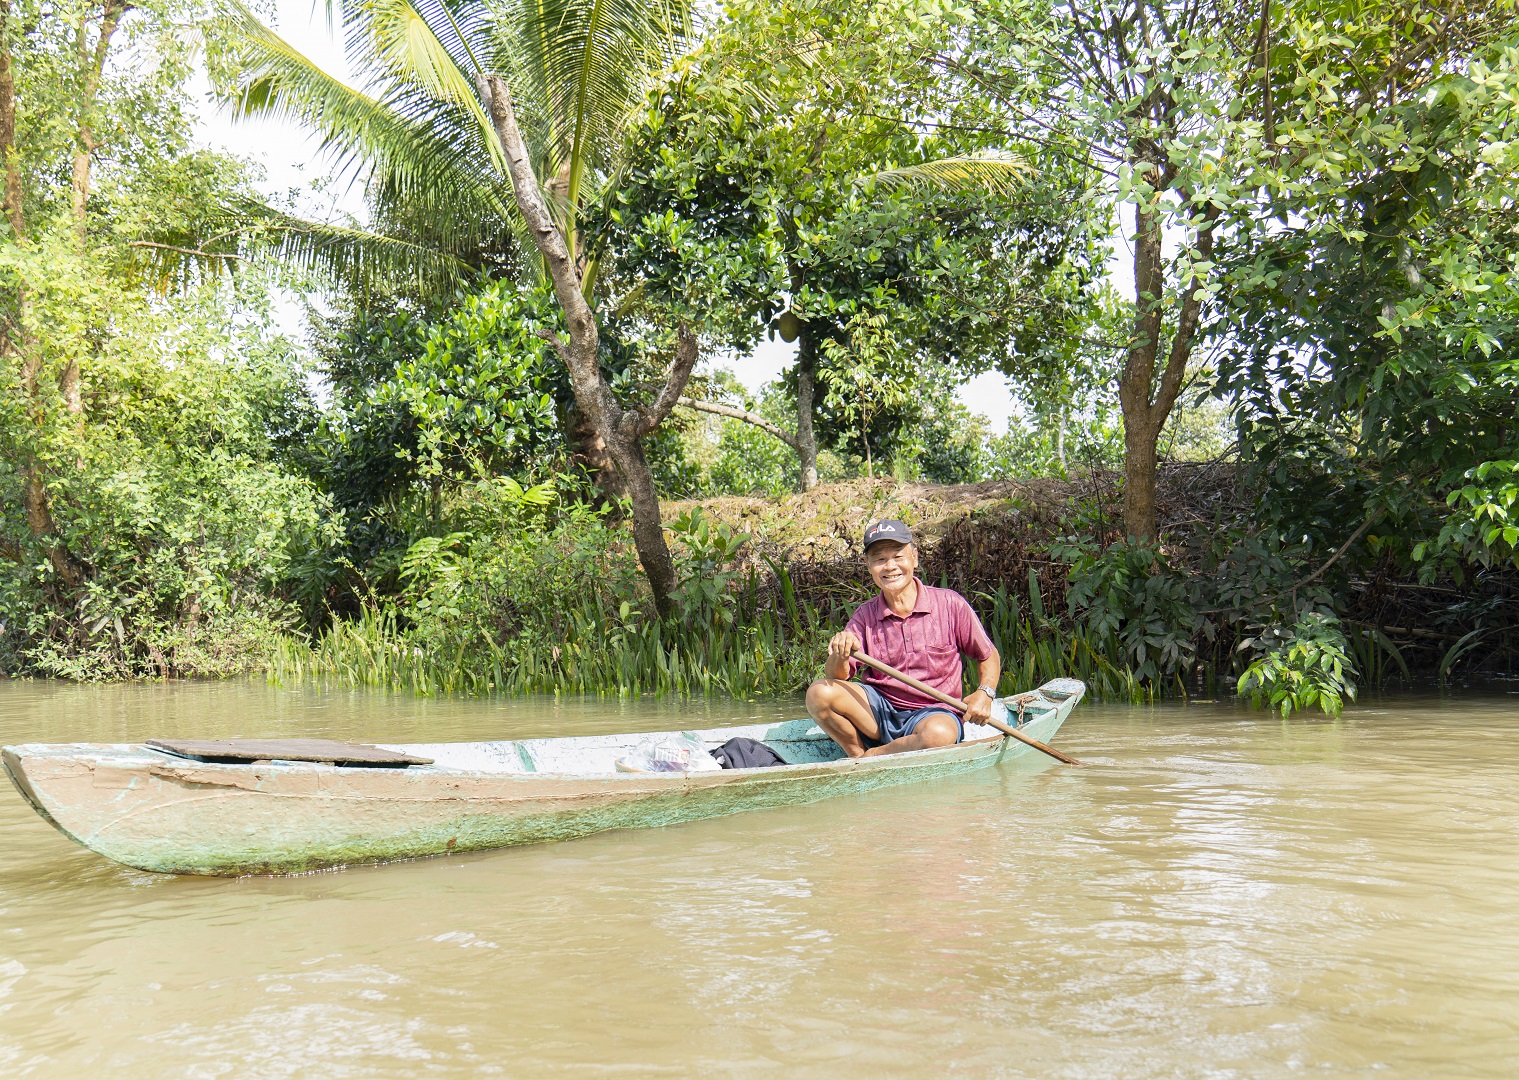 A local man sails a dinghy. Dinghies can be made of wood or composite. Photo: Nguyen Trung Au / Tuoi Tre News